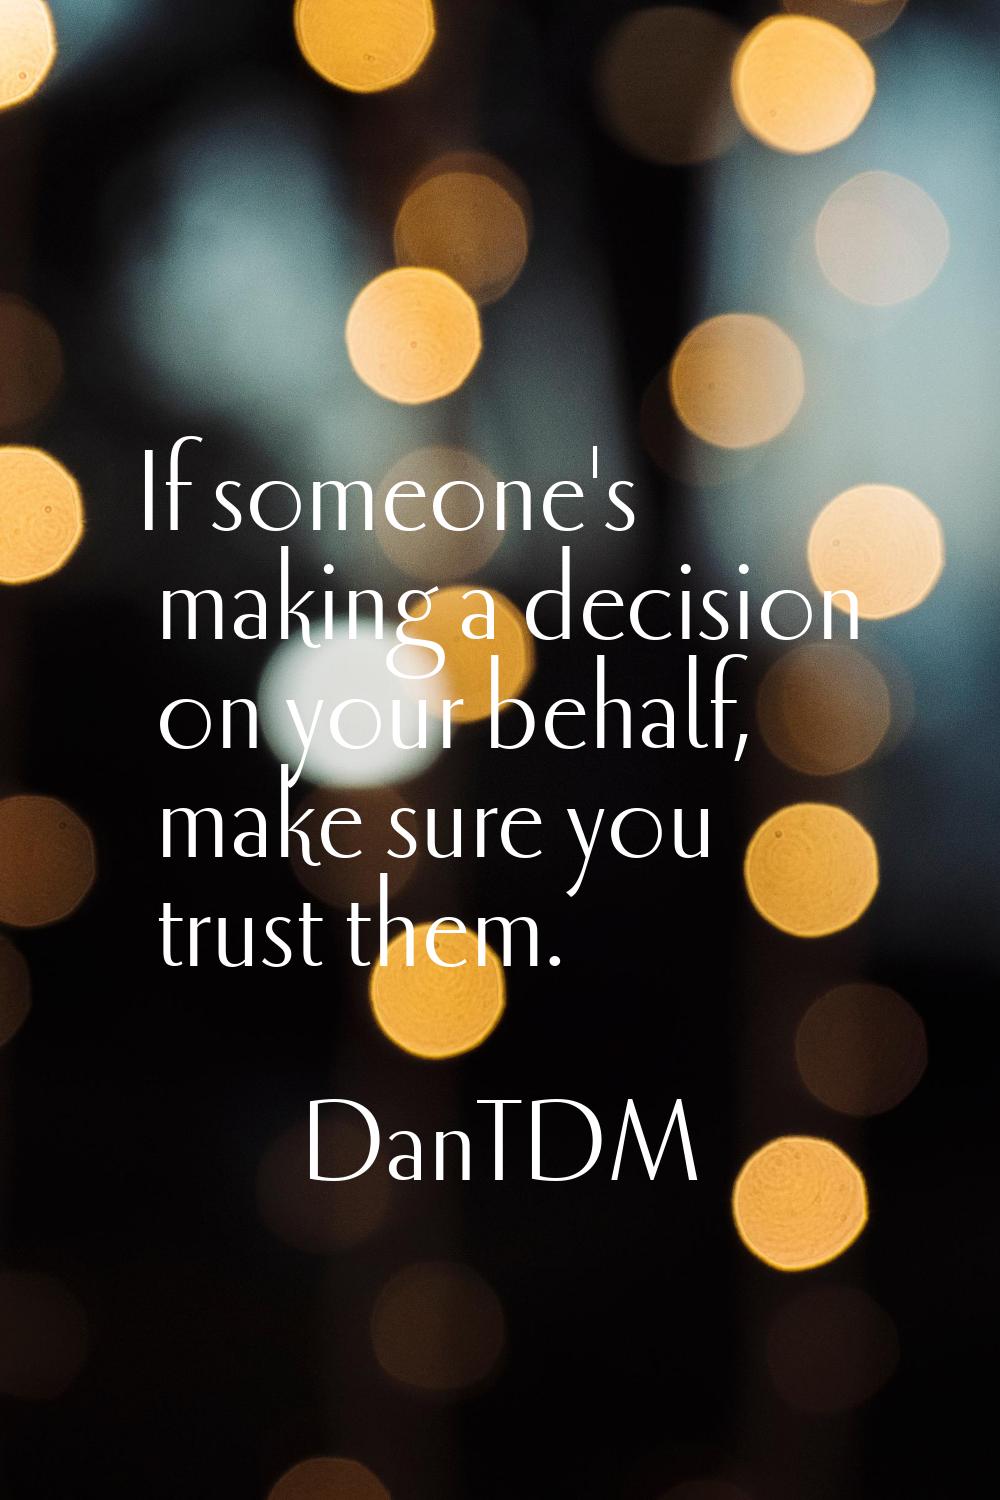 If someone's making a decision on your behalf, make sure you trust them.